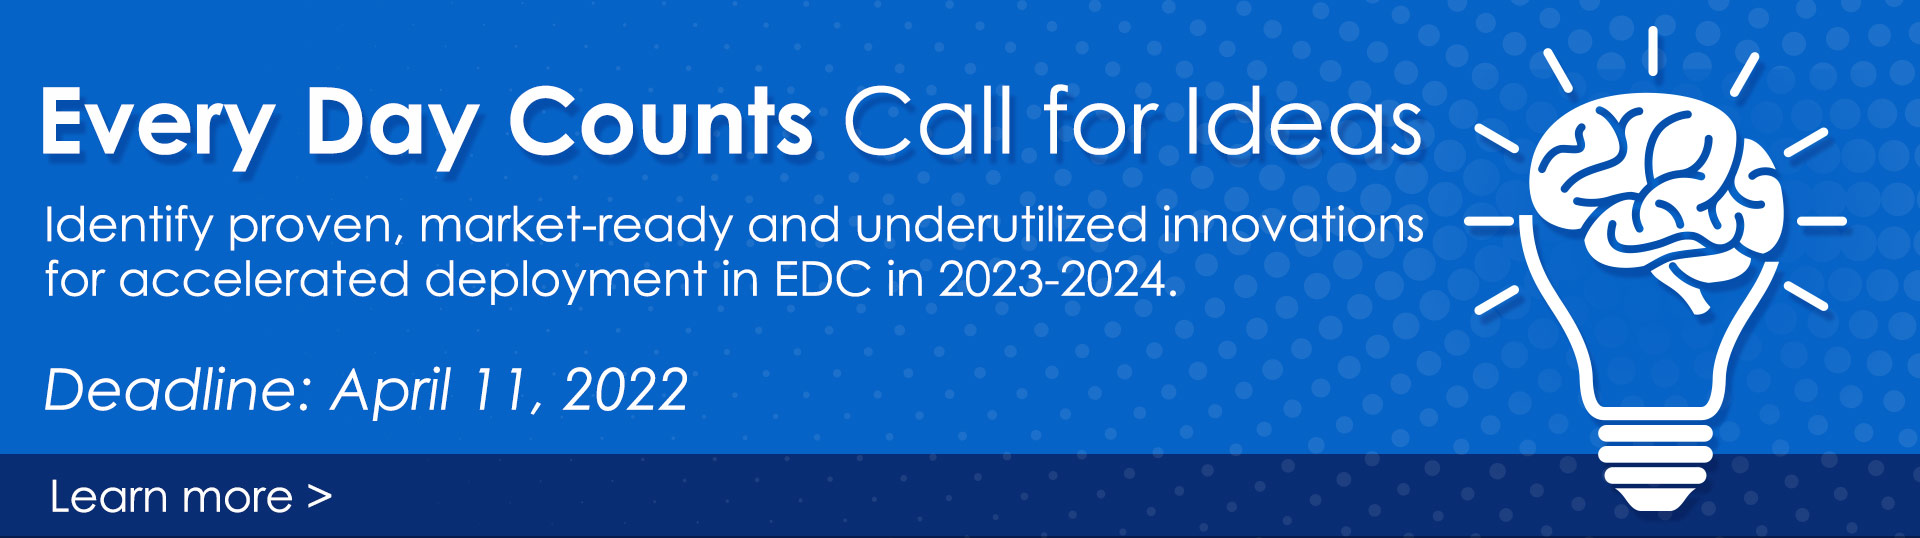 Every Day Counts Call for Ideas. Identify proven, market-ready and underutilized innovations for accelerated deployment in EDC in 2021-2022. Deadline: January 21, 2020.